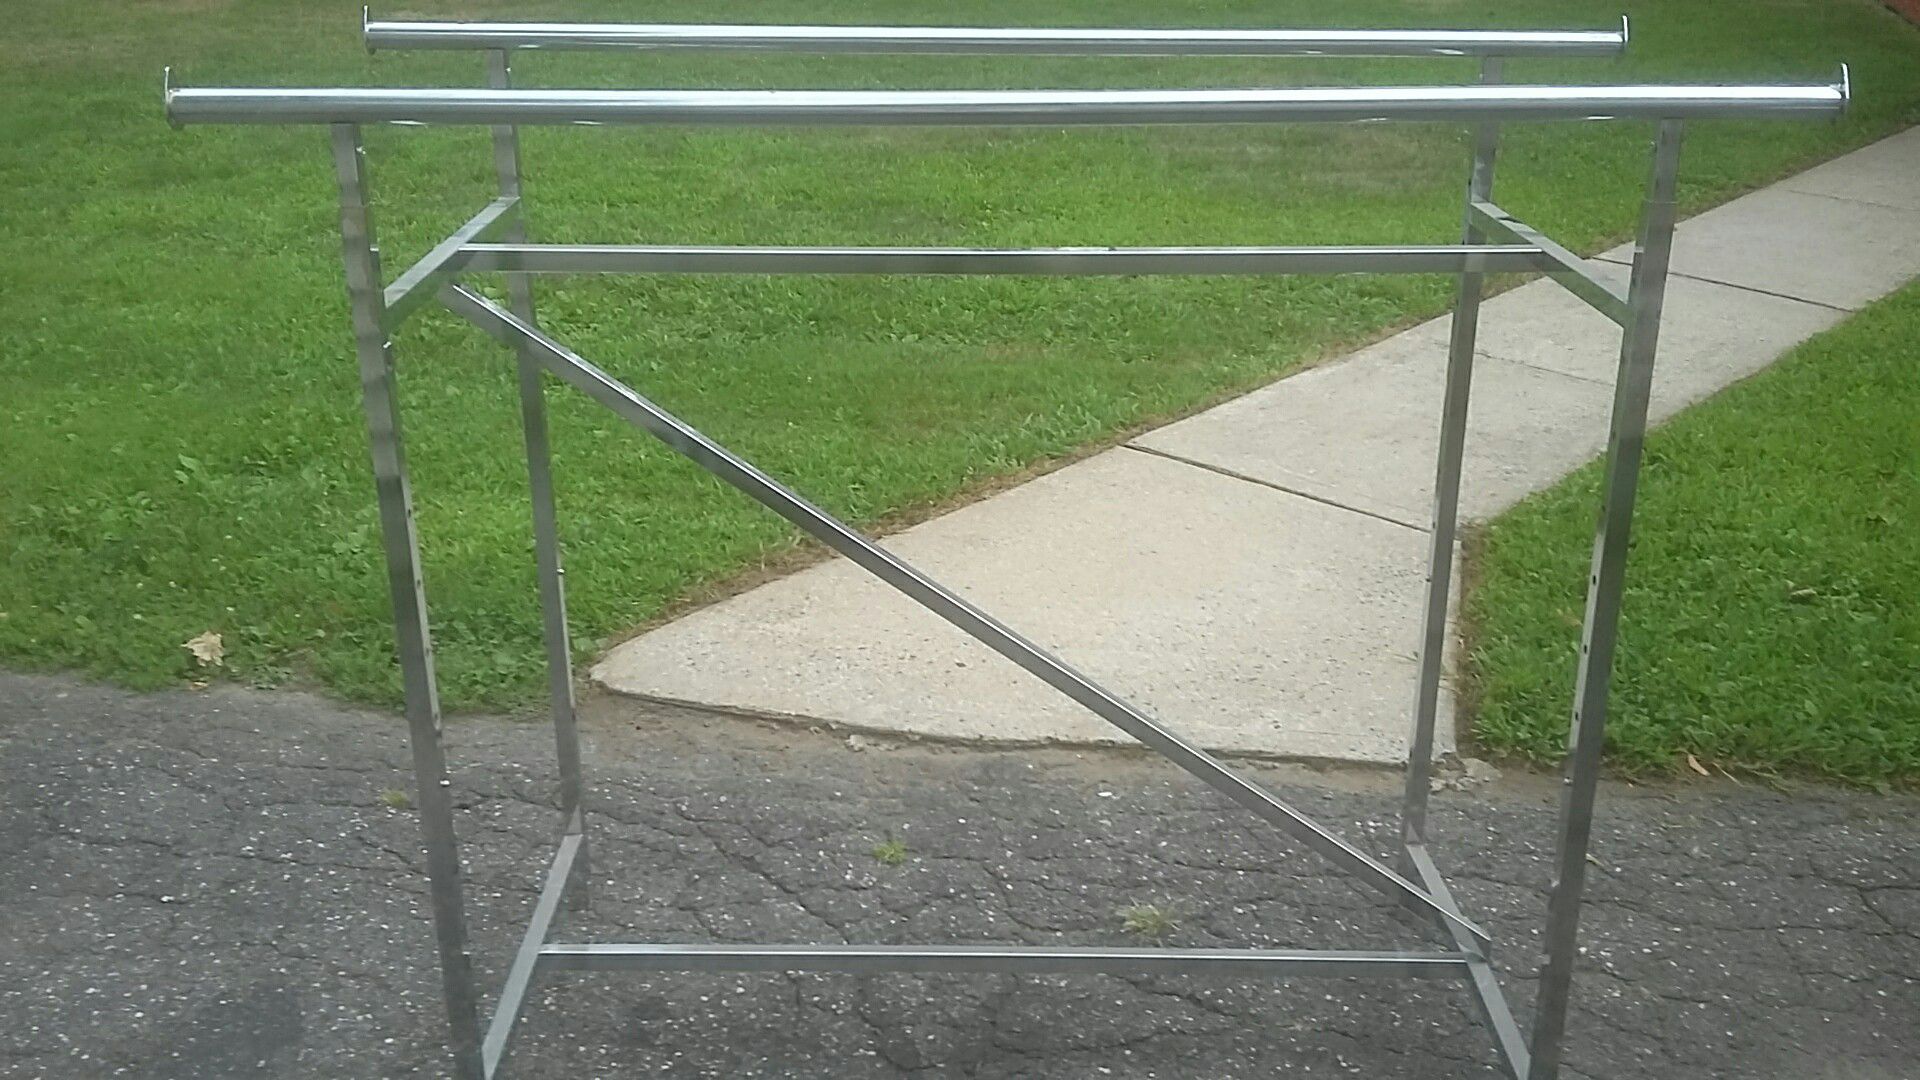 I have two clothes racks adjustable in height $45 each